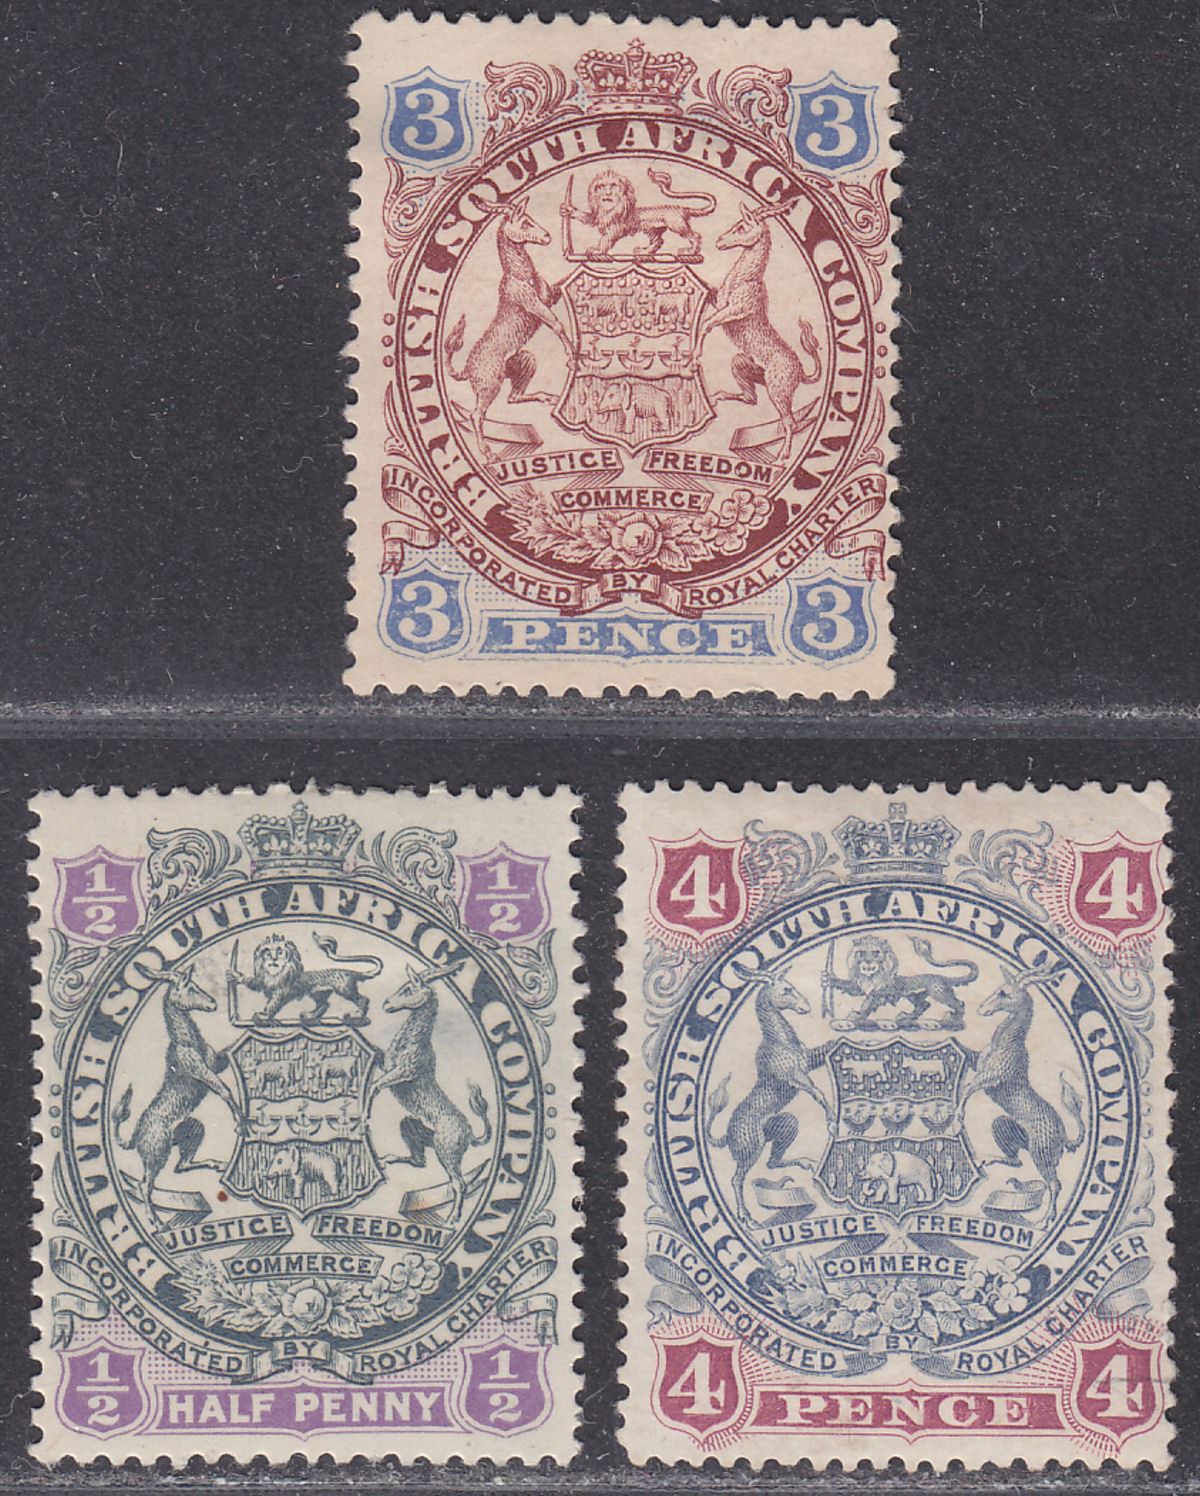 Rhodesia 1896 QV BSAC Large Arms 3d Die I and ½d, 4d Die II Mint faults